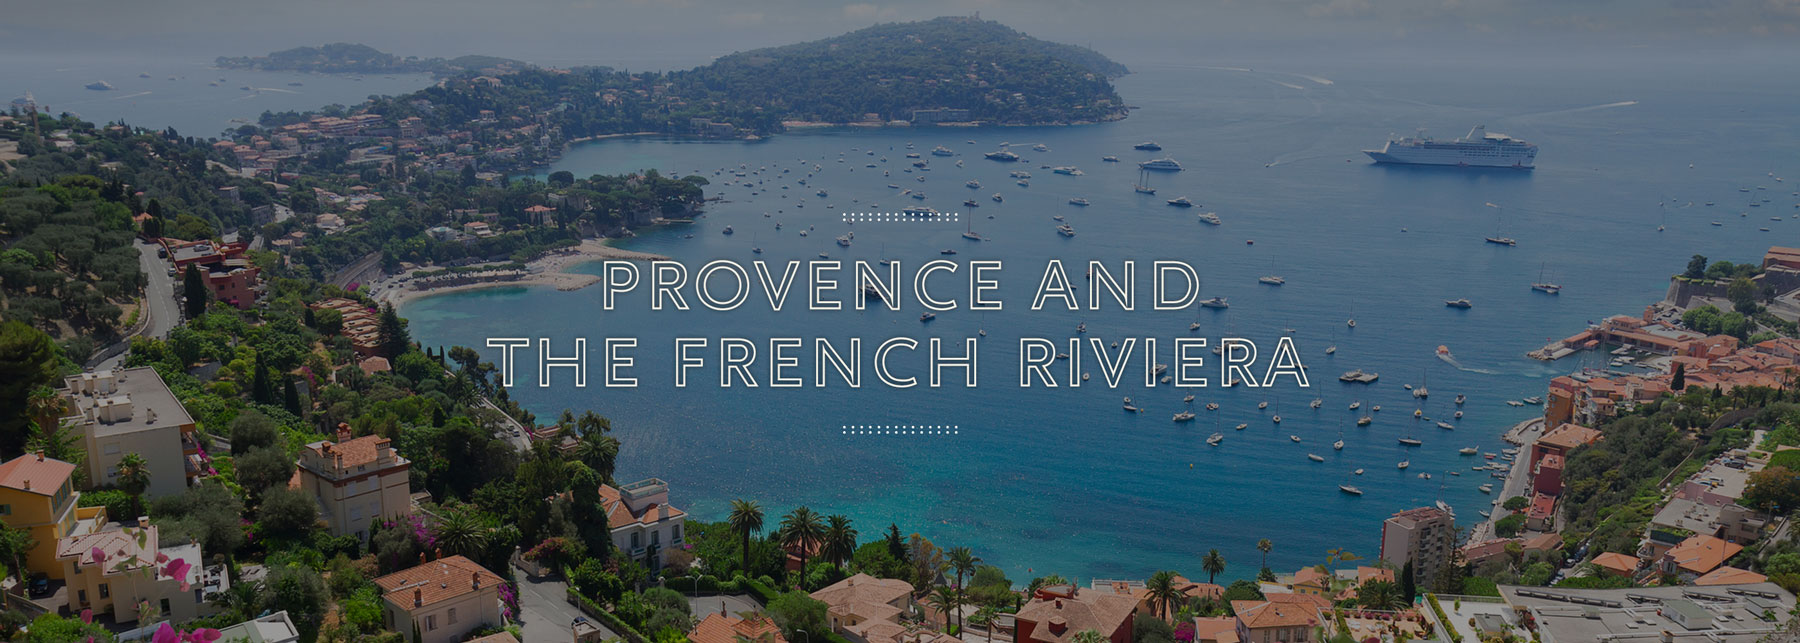 Culinary Tour to Provence and the French Riviera